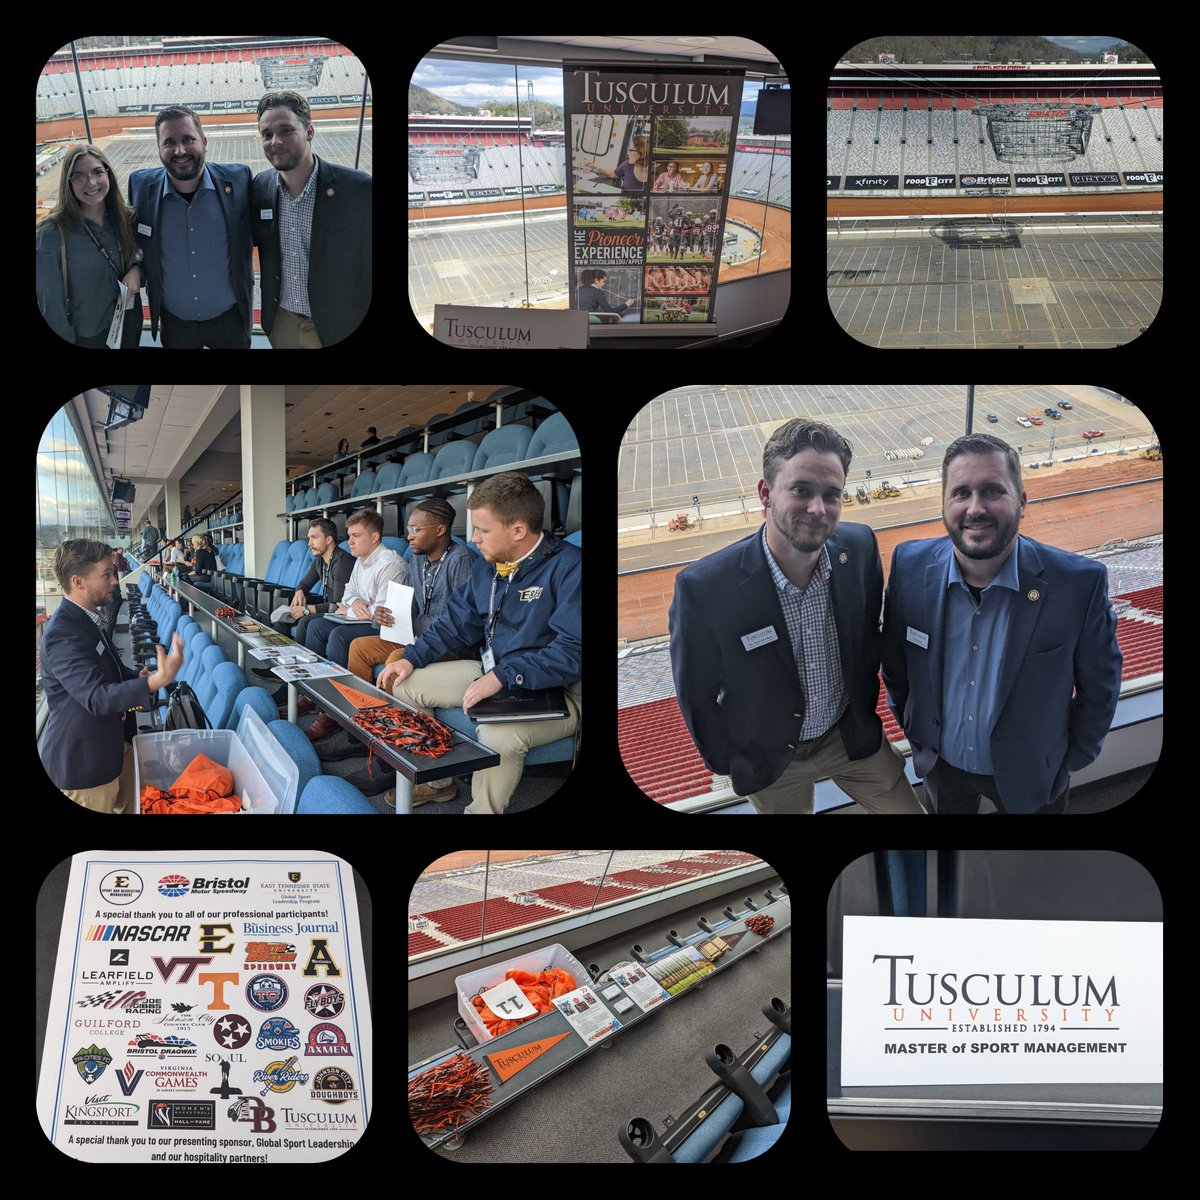 Tusculum University Sport Management had a great time promoting the Master in Sport Management program last night at the Breaking Into Sports Event at Bristol Motor Speedway. This event gets better and better each year! #WeArePioneers #TUSportManagement https://t.co/kUnYOvJQeJ